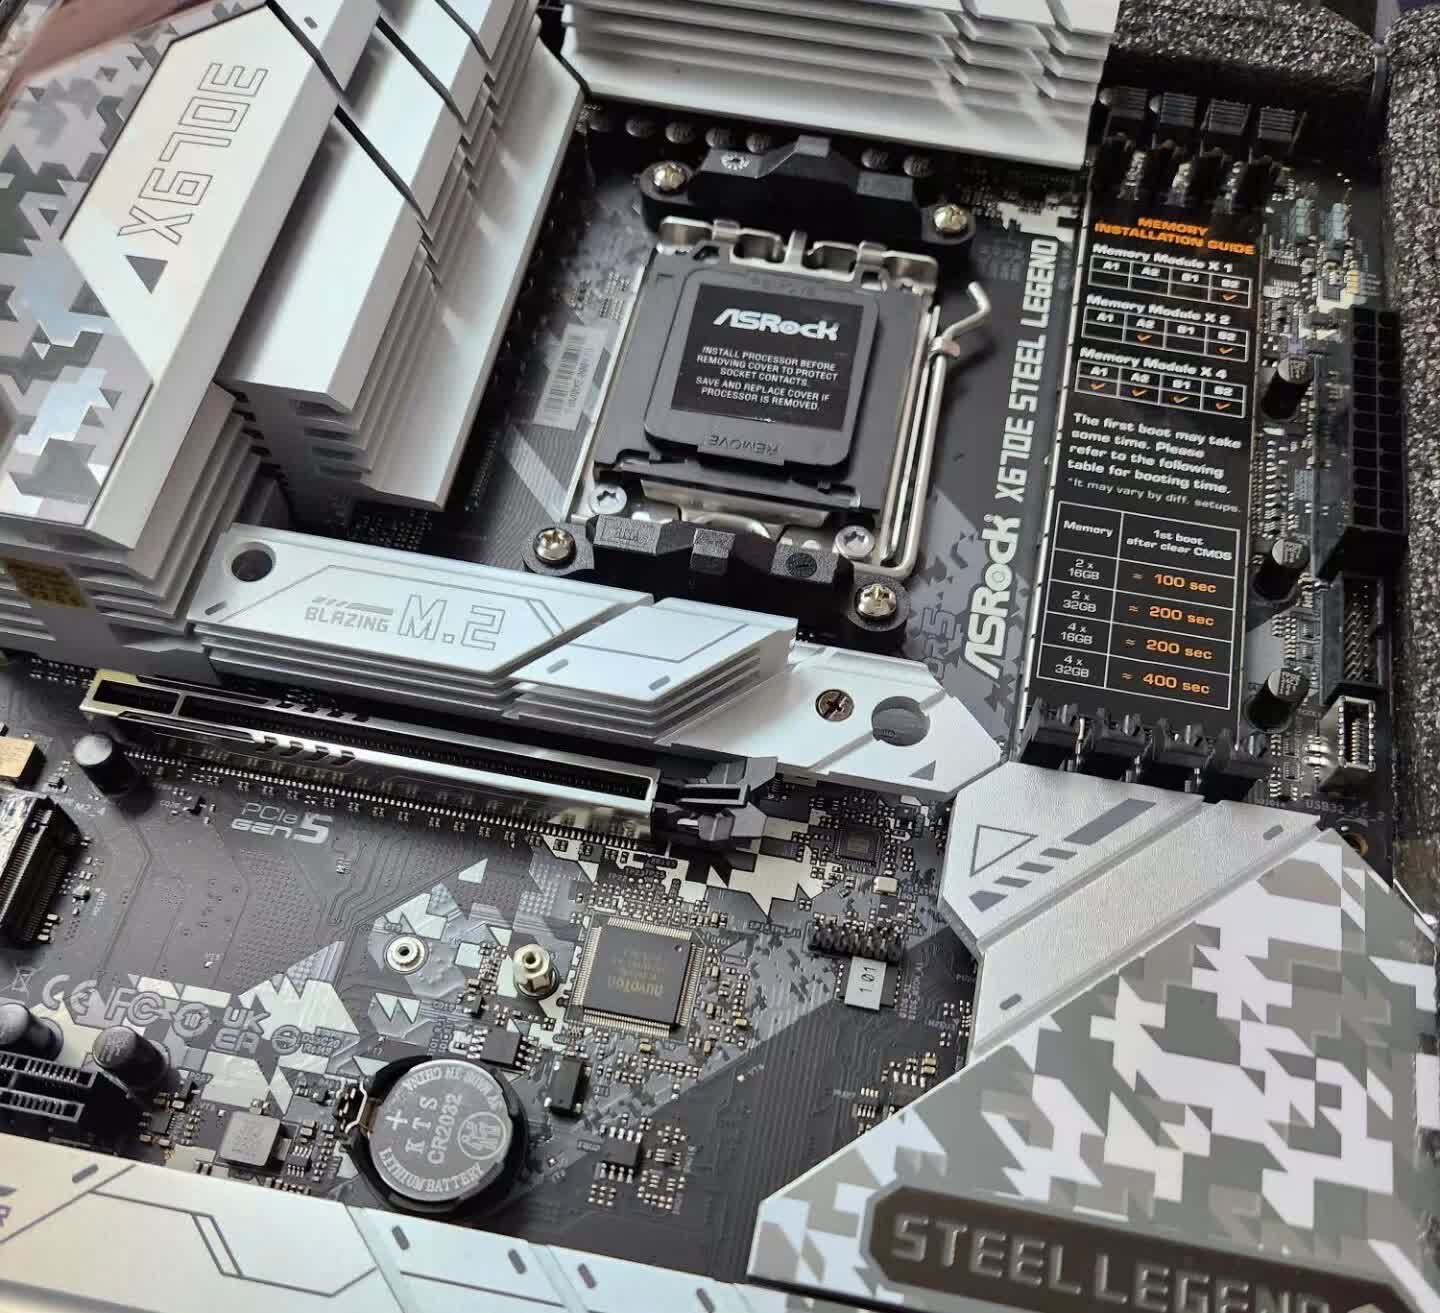 vergeven Cyclopen het is mooi Asrock will send you a replacement motherboard if you can't get the  stickers out of your DIMM sockets | TechSpot